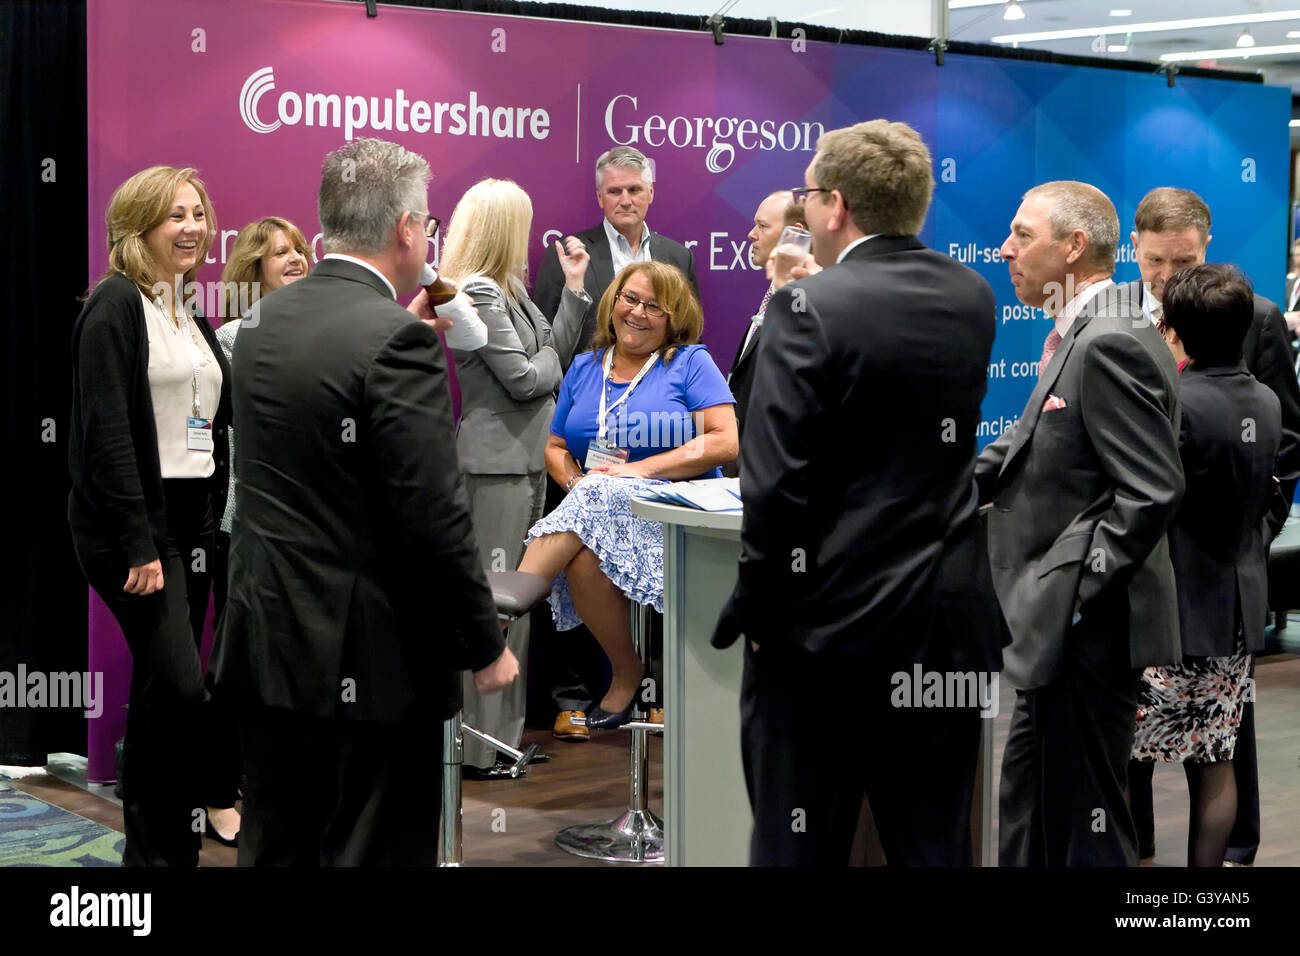 Businessmen and businesswomen discussing business and chatting in front of Computershare Georgeson booth at a business expo - USA Stock Photo